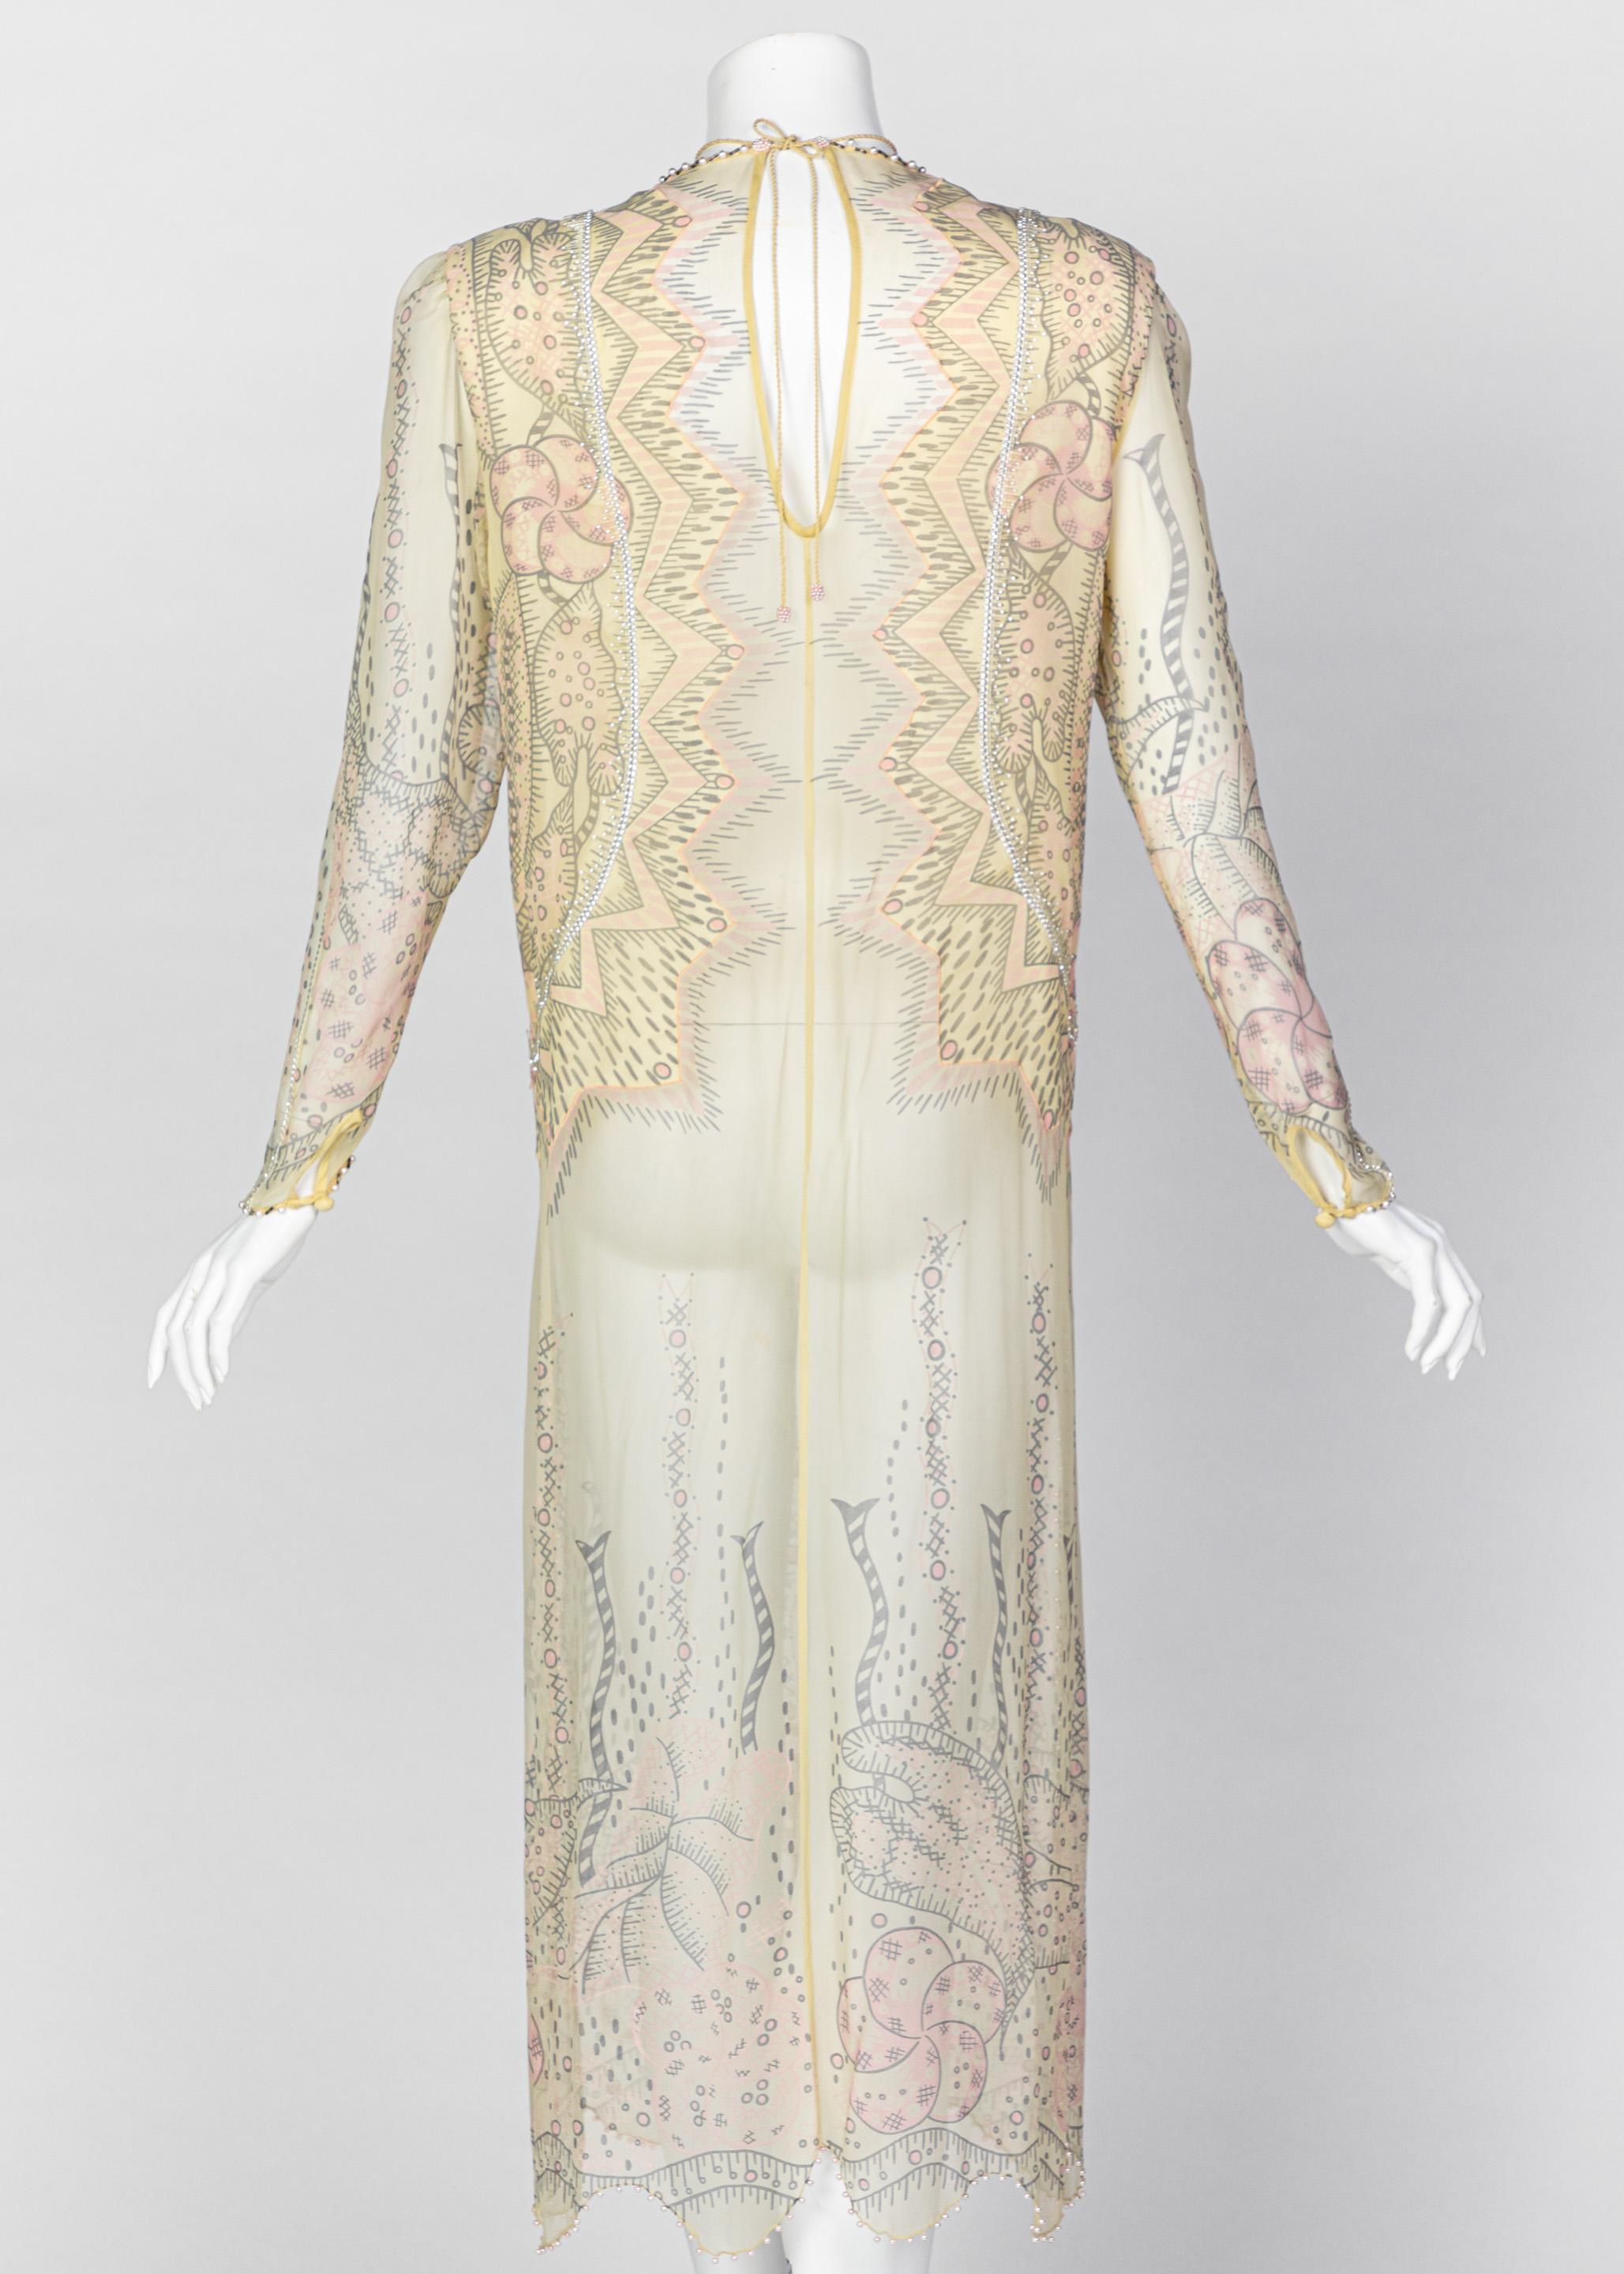 Zandra Rhodes Unlabelled Hand Painted Sheer Silk Pearl Edged Dress, 1980s In Excellent Condition In Boca Raton, FL